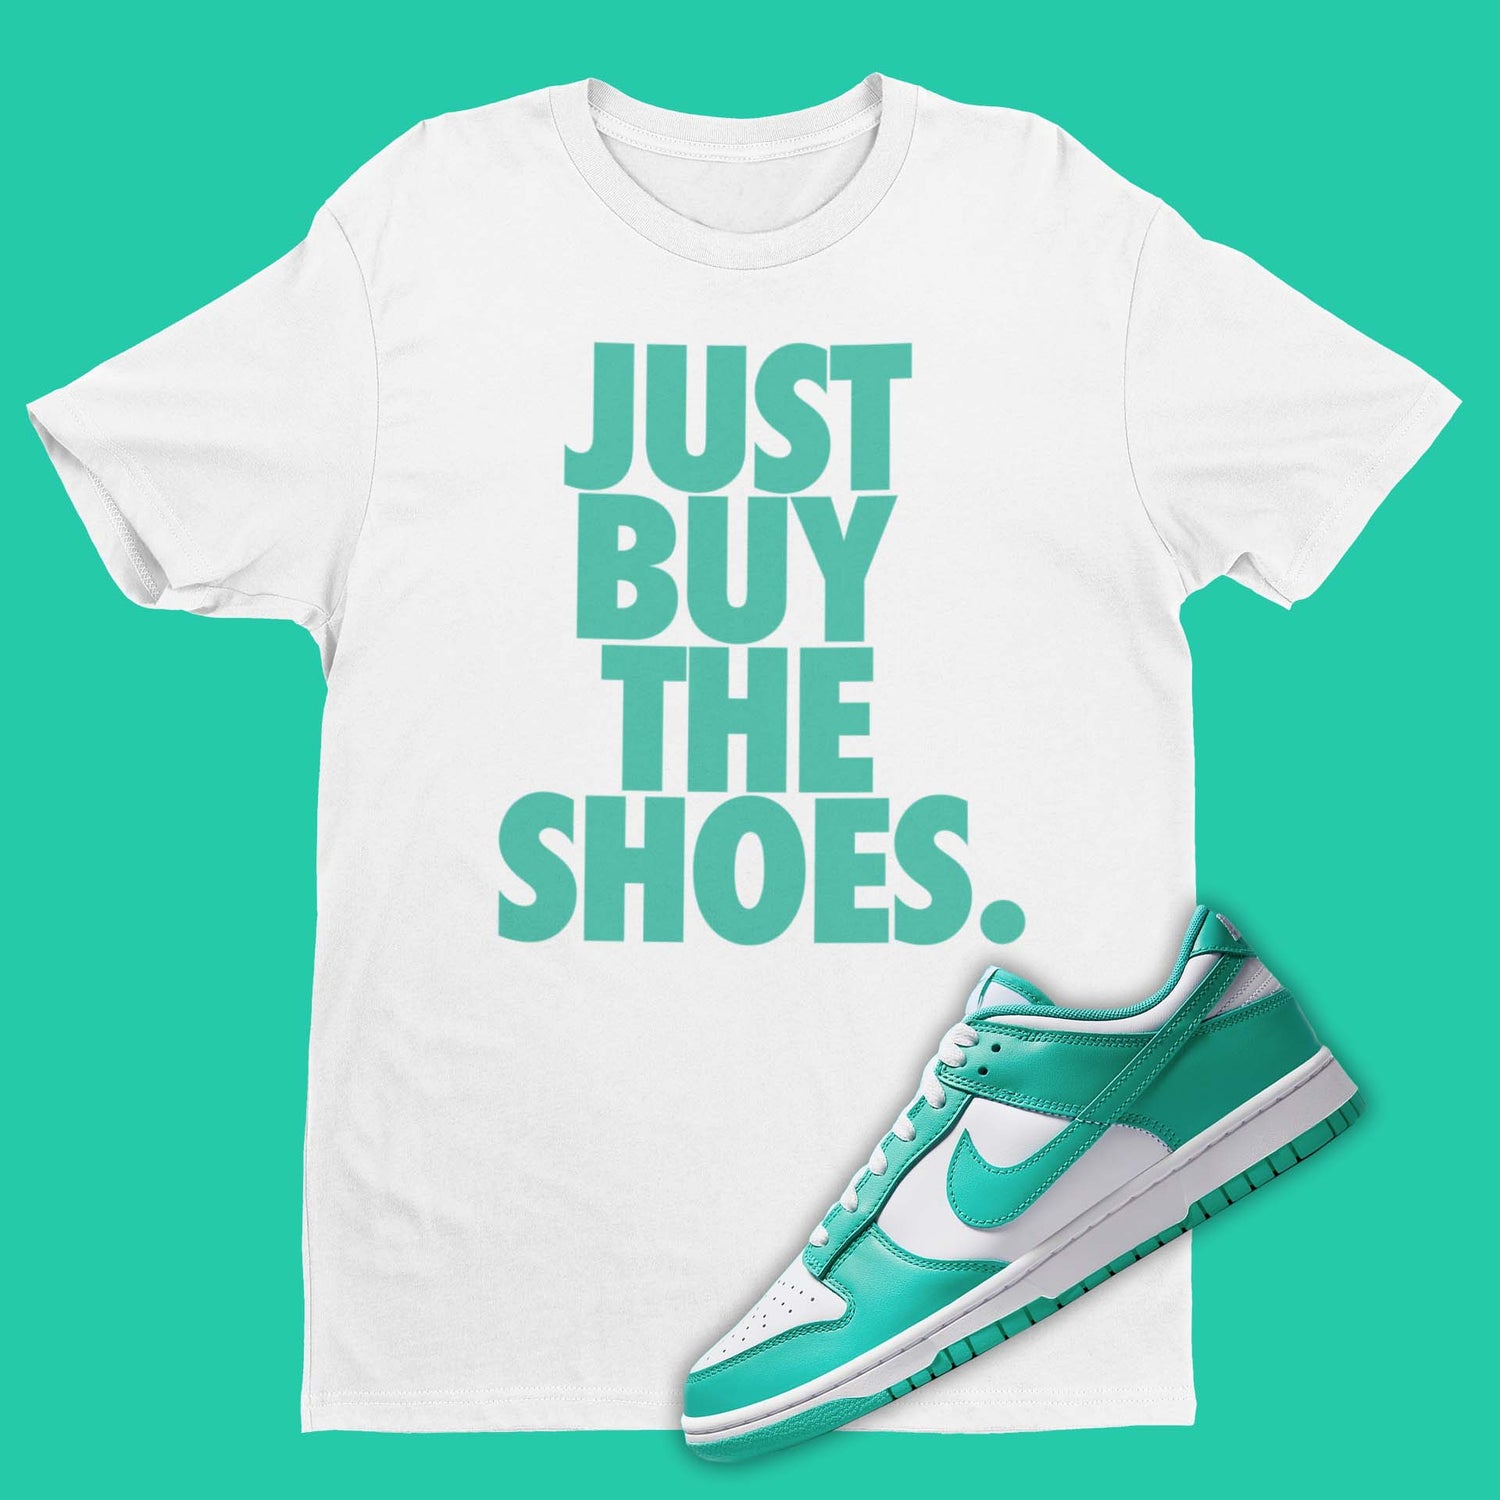 Nike Dunk Low Clear Jade inspired t-shirt featuring the text 'Just buy the shoes'